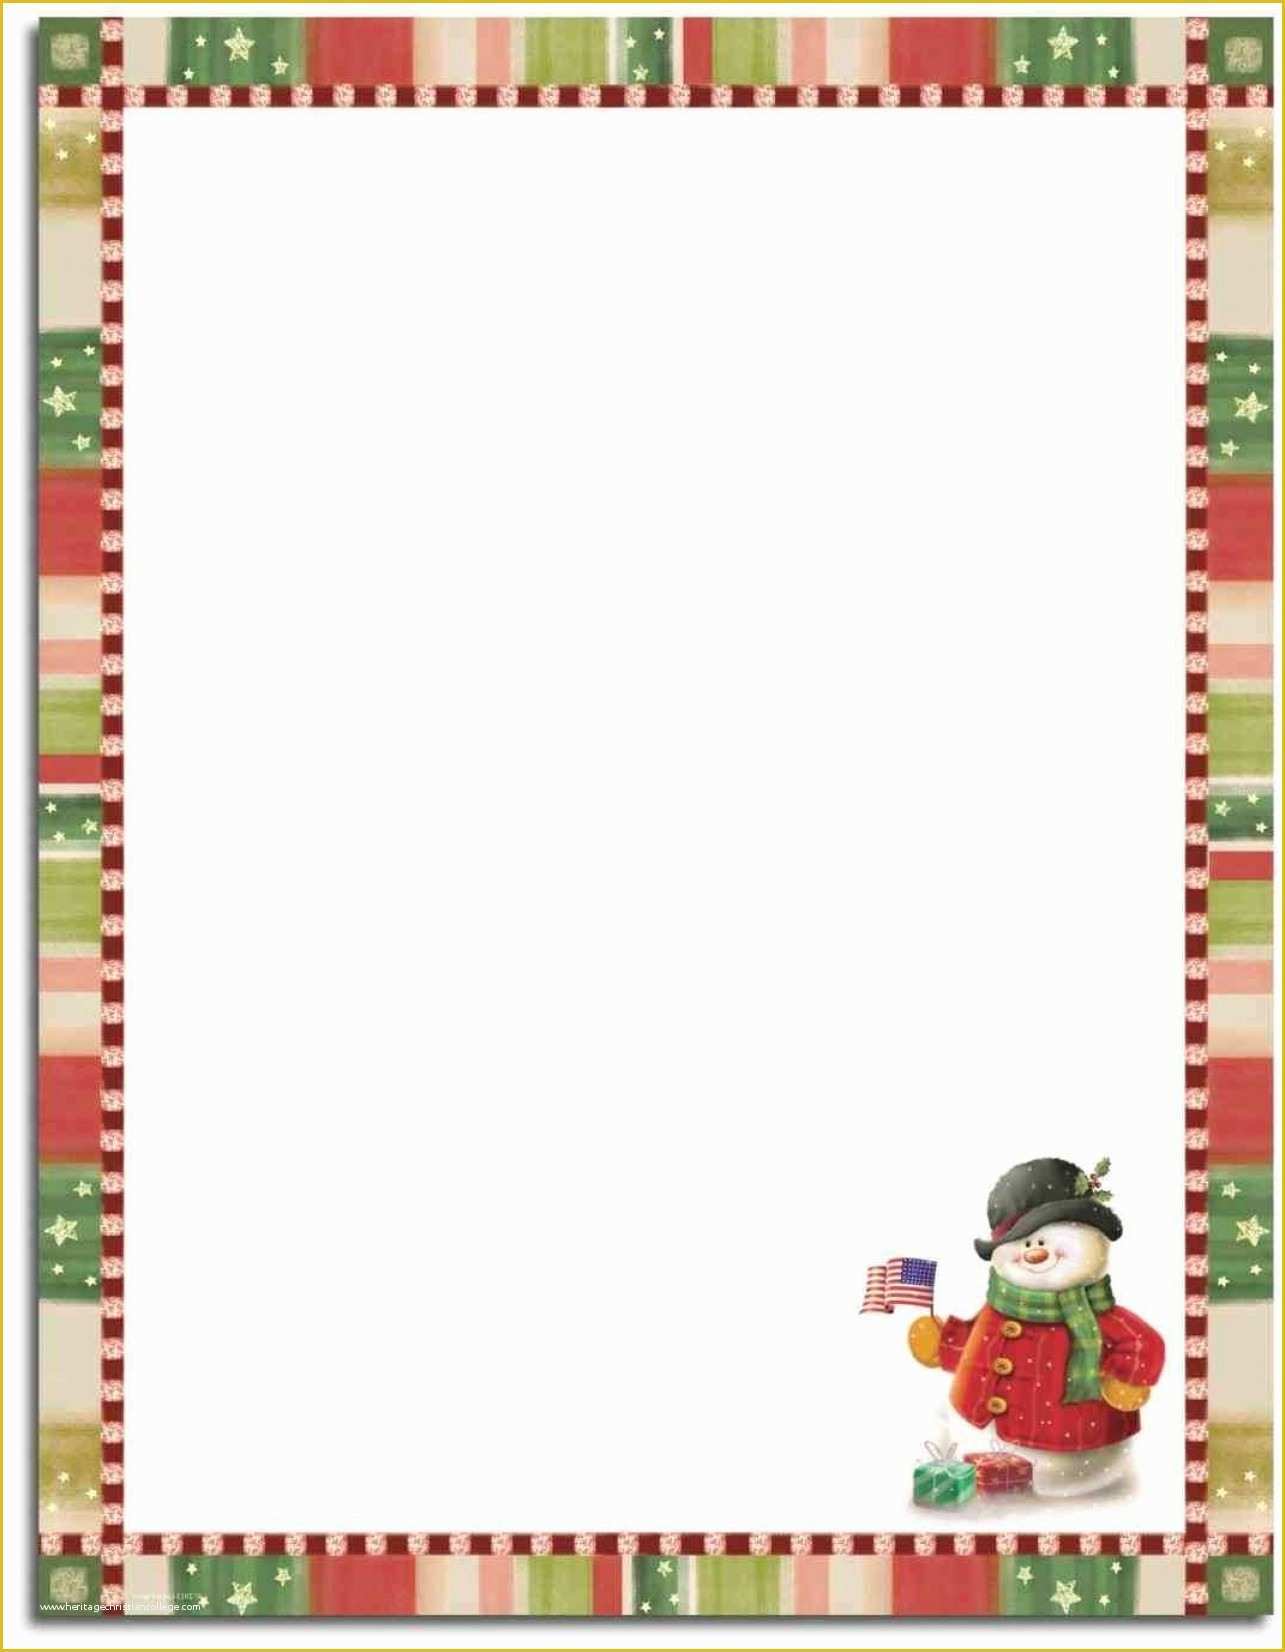 Christmas Border Templates Free Download Of Ms Word Christmas Borders Zromtk Christmas Border Holly